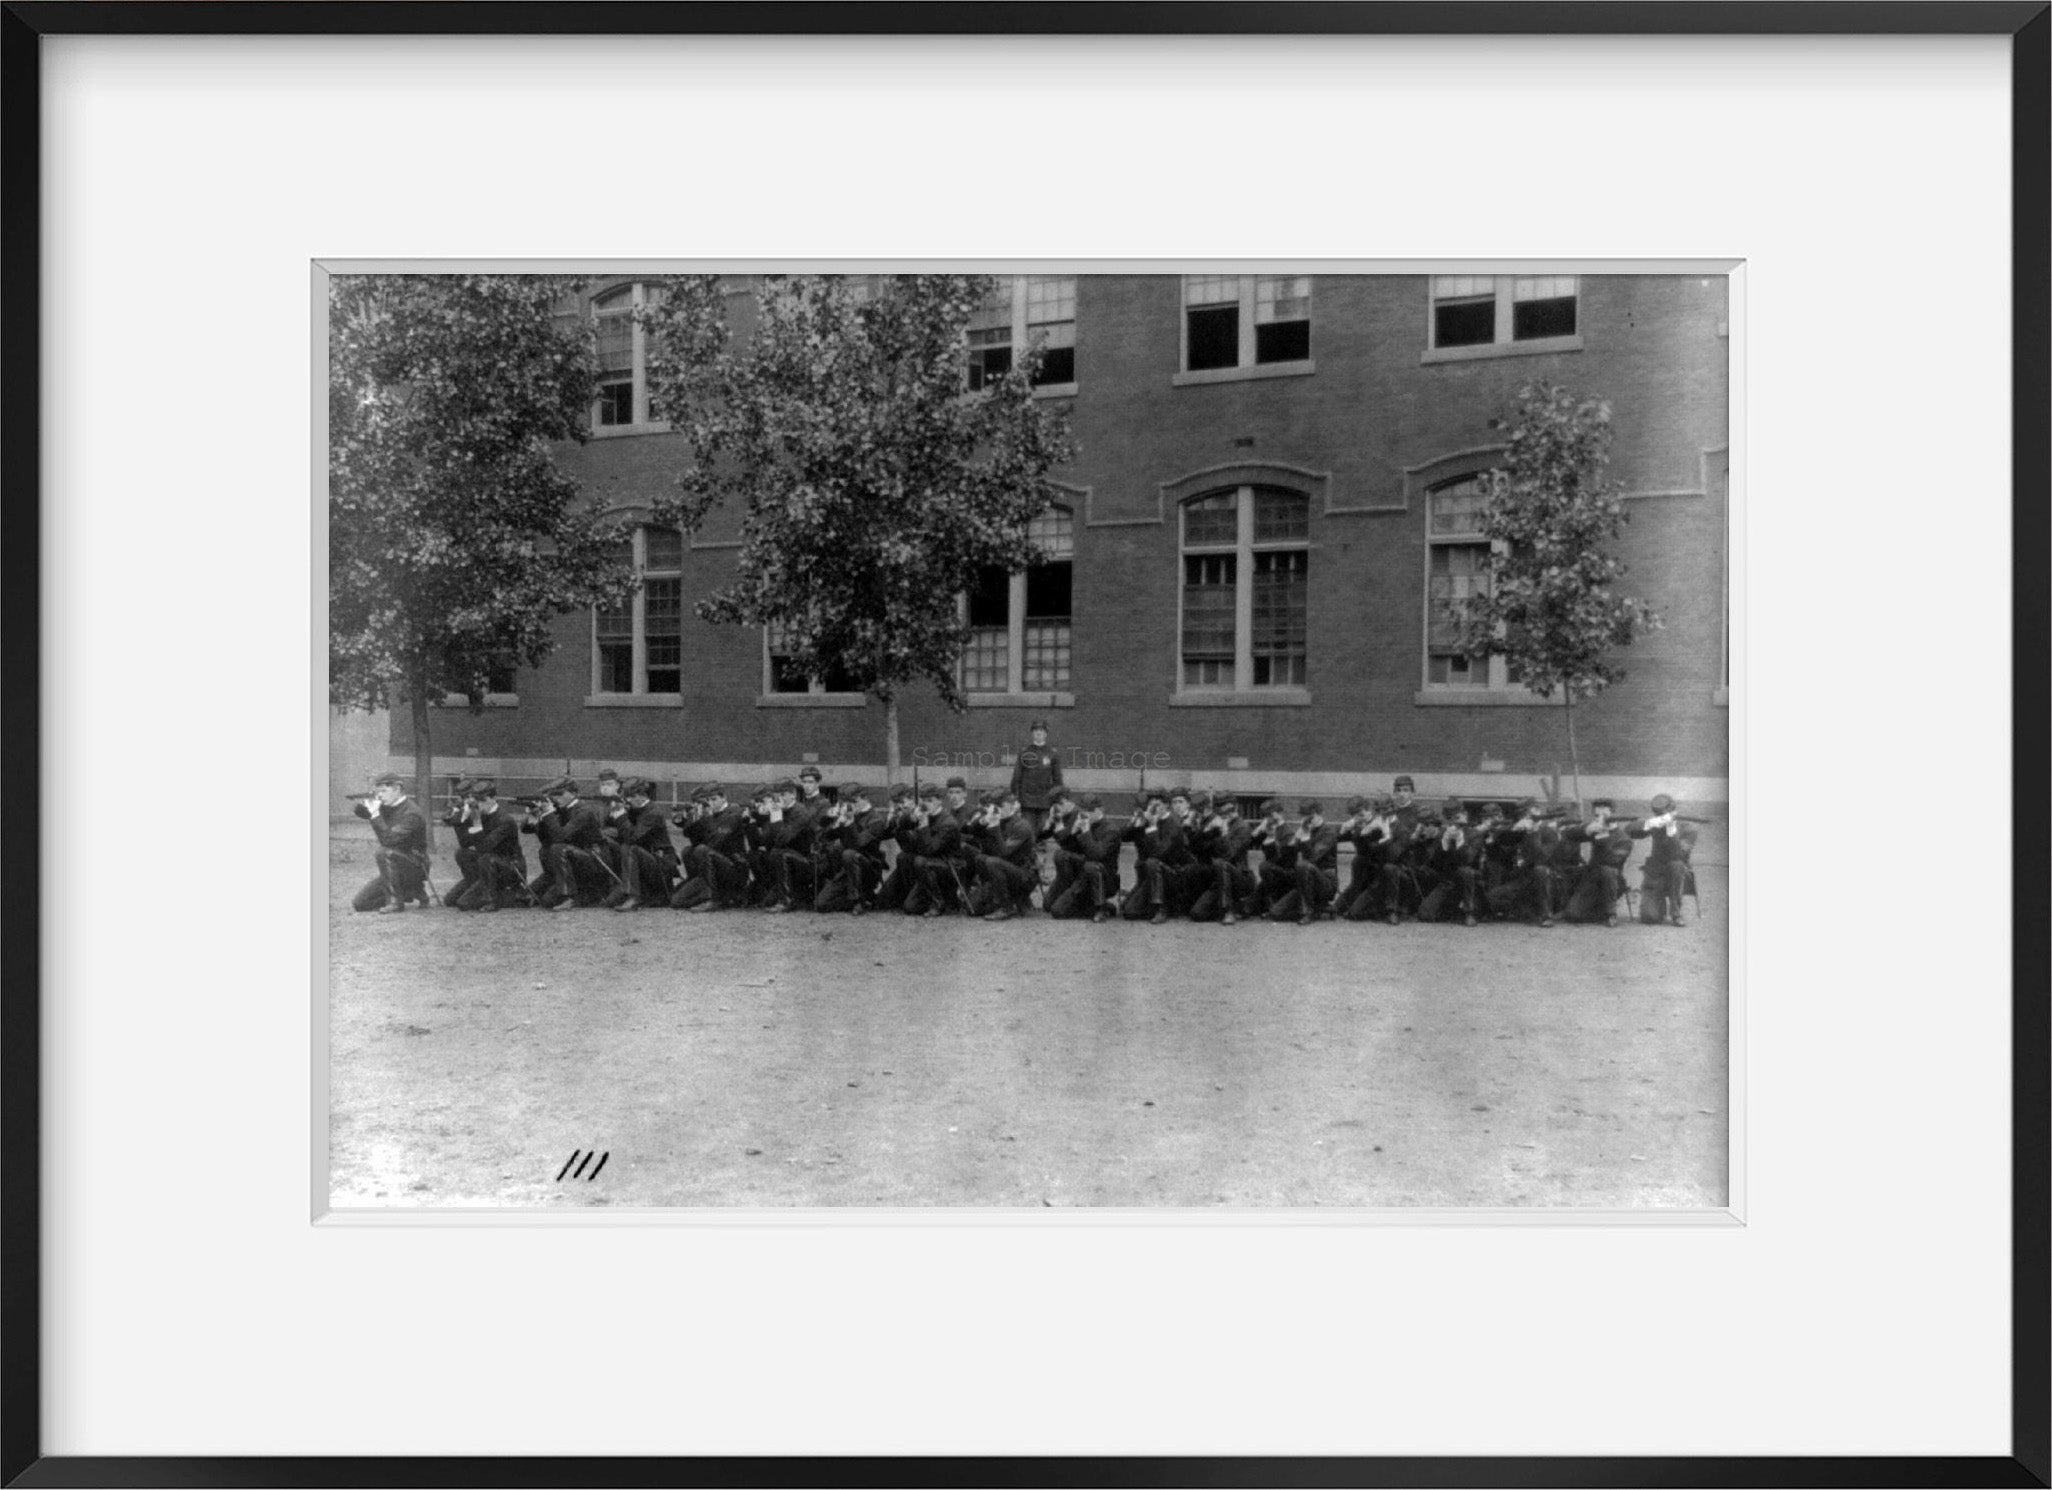 Vintage 1899? photograph: Uniformed cadets, Central High School Subjects: Educ